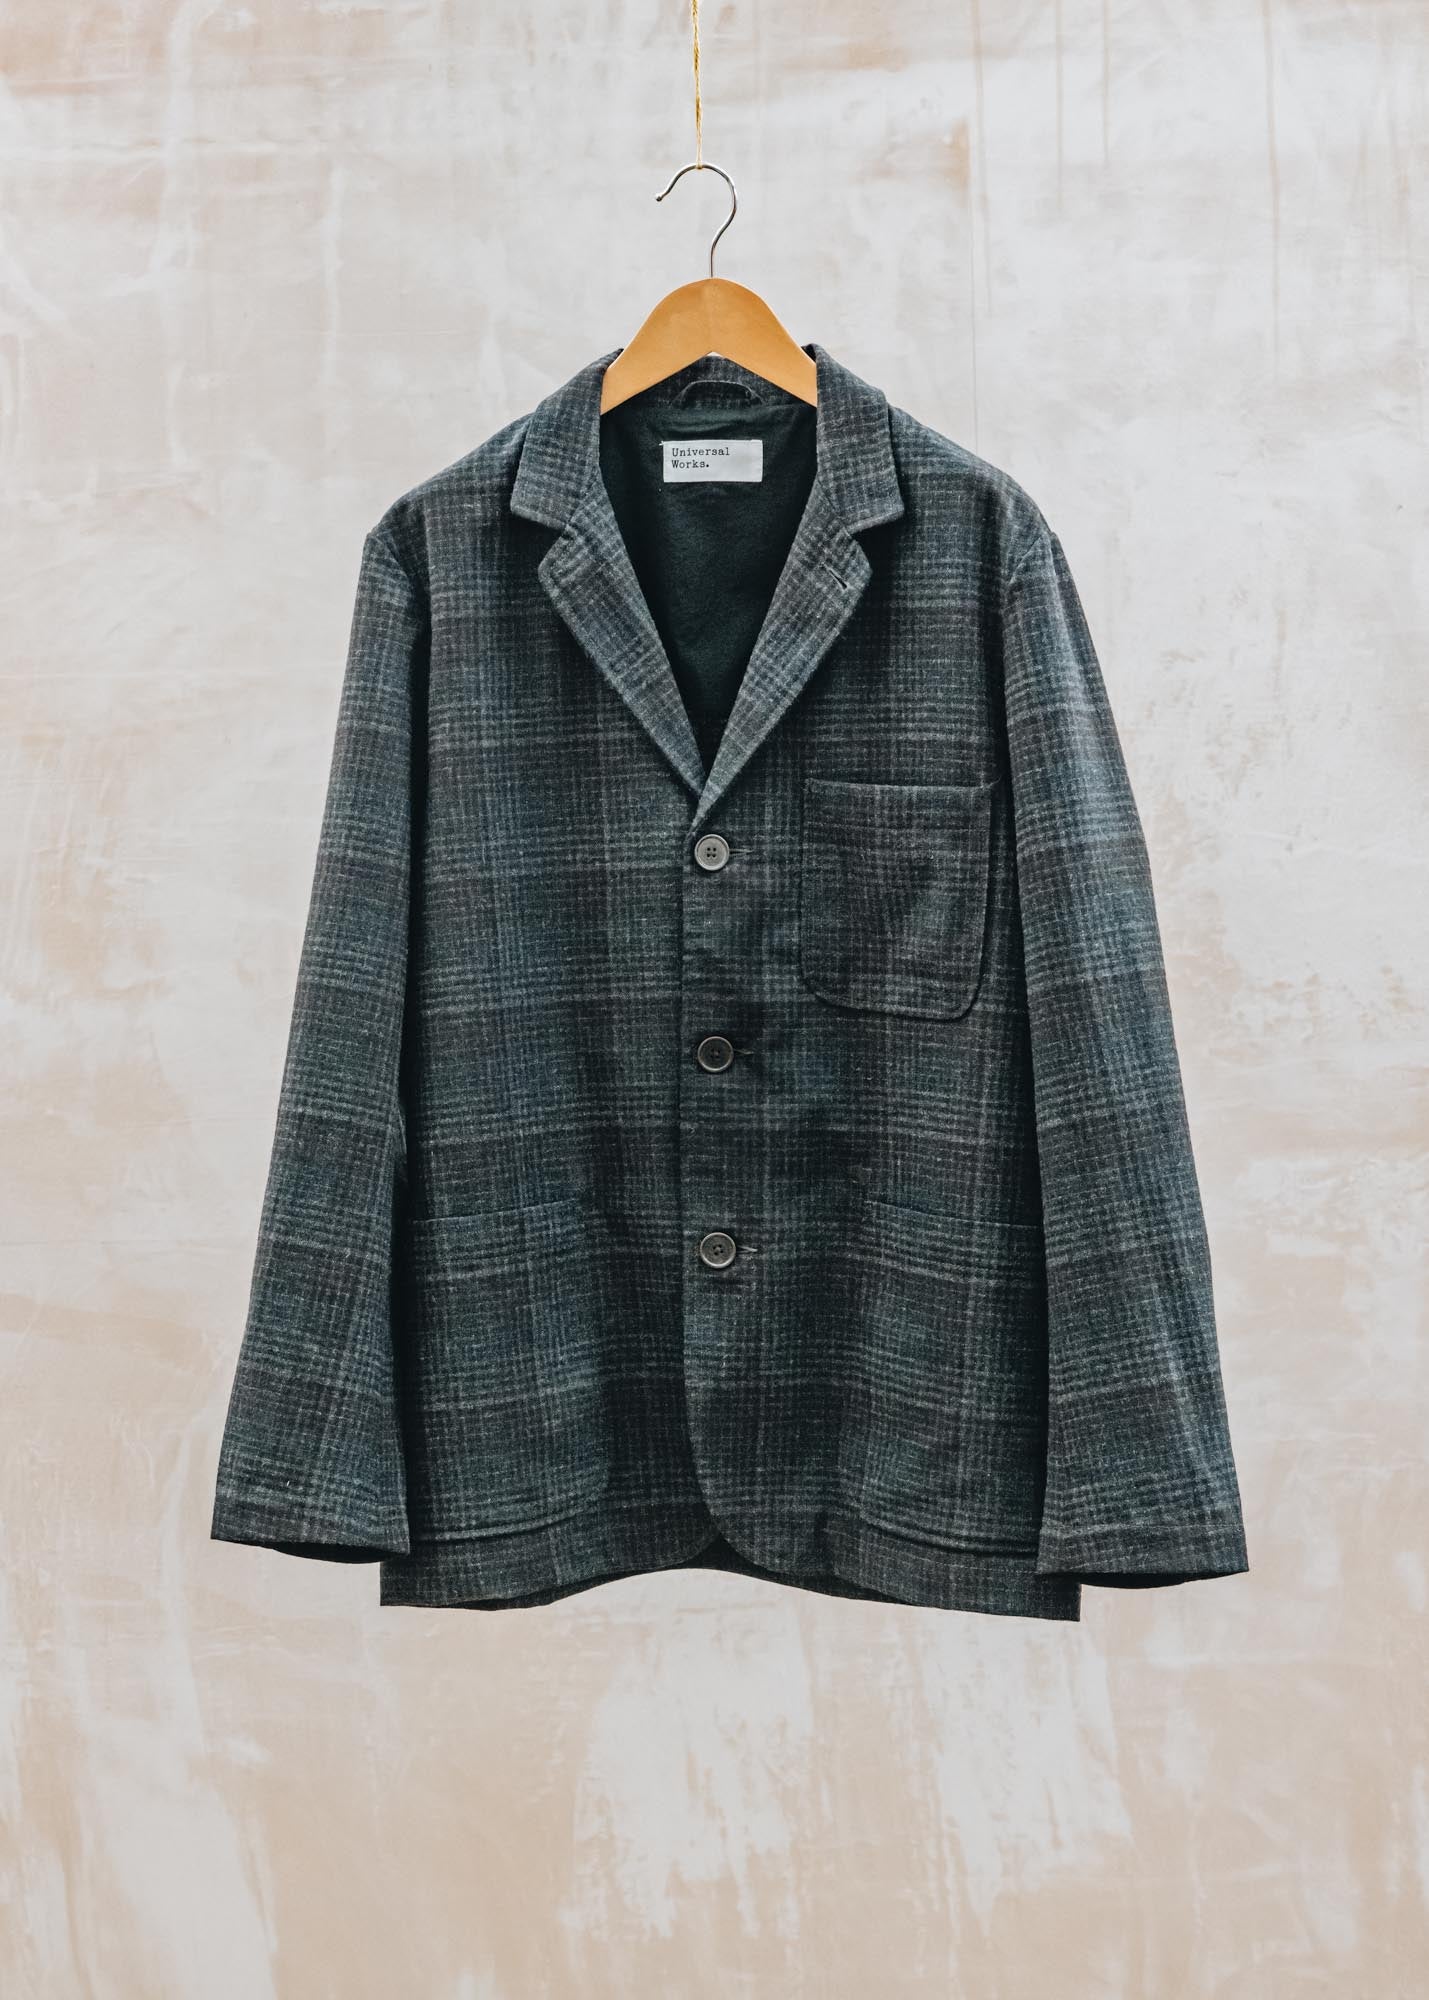 Universal Works Three Button Jacket in Charcoal Wool